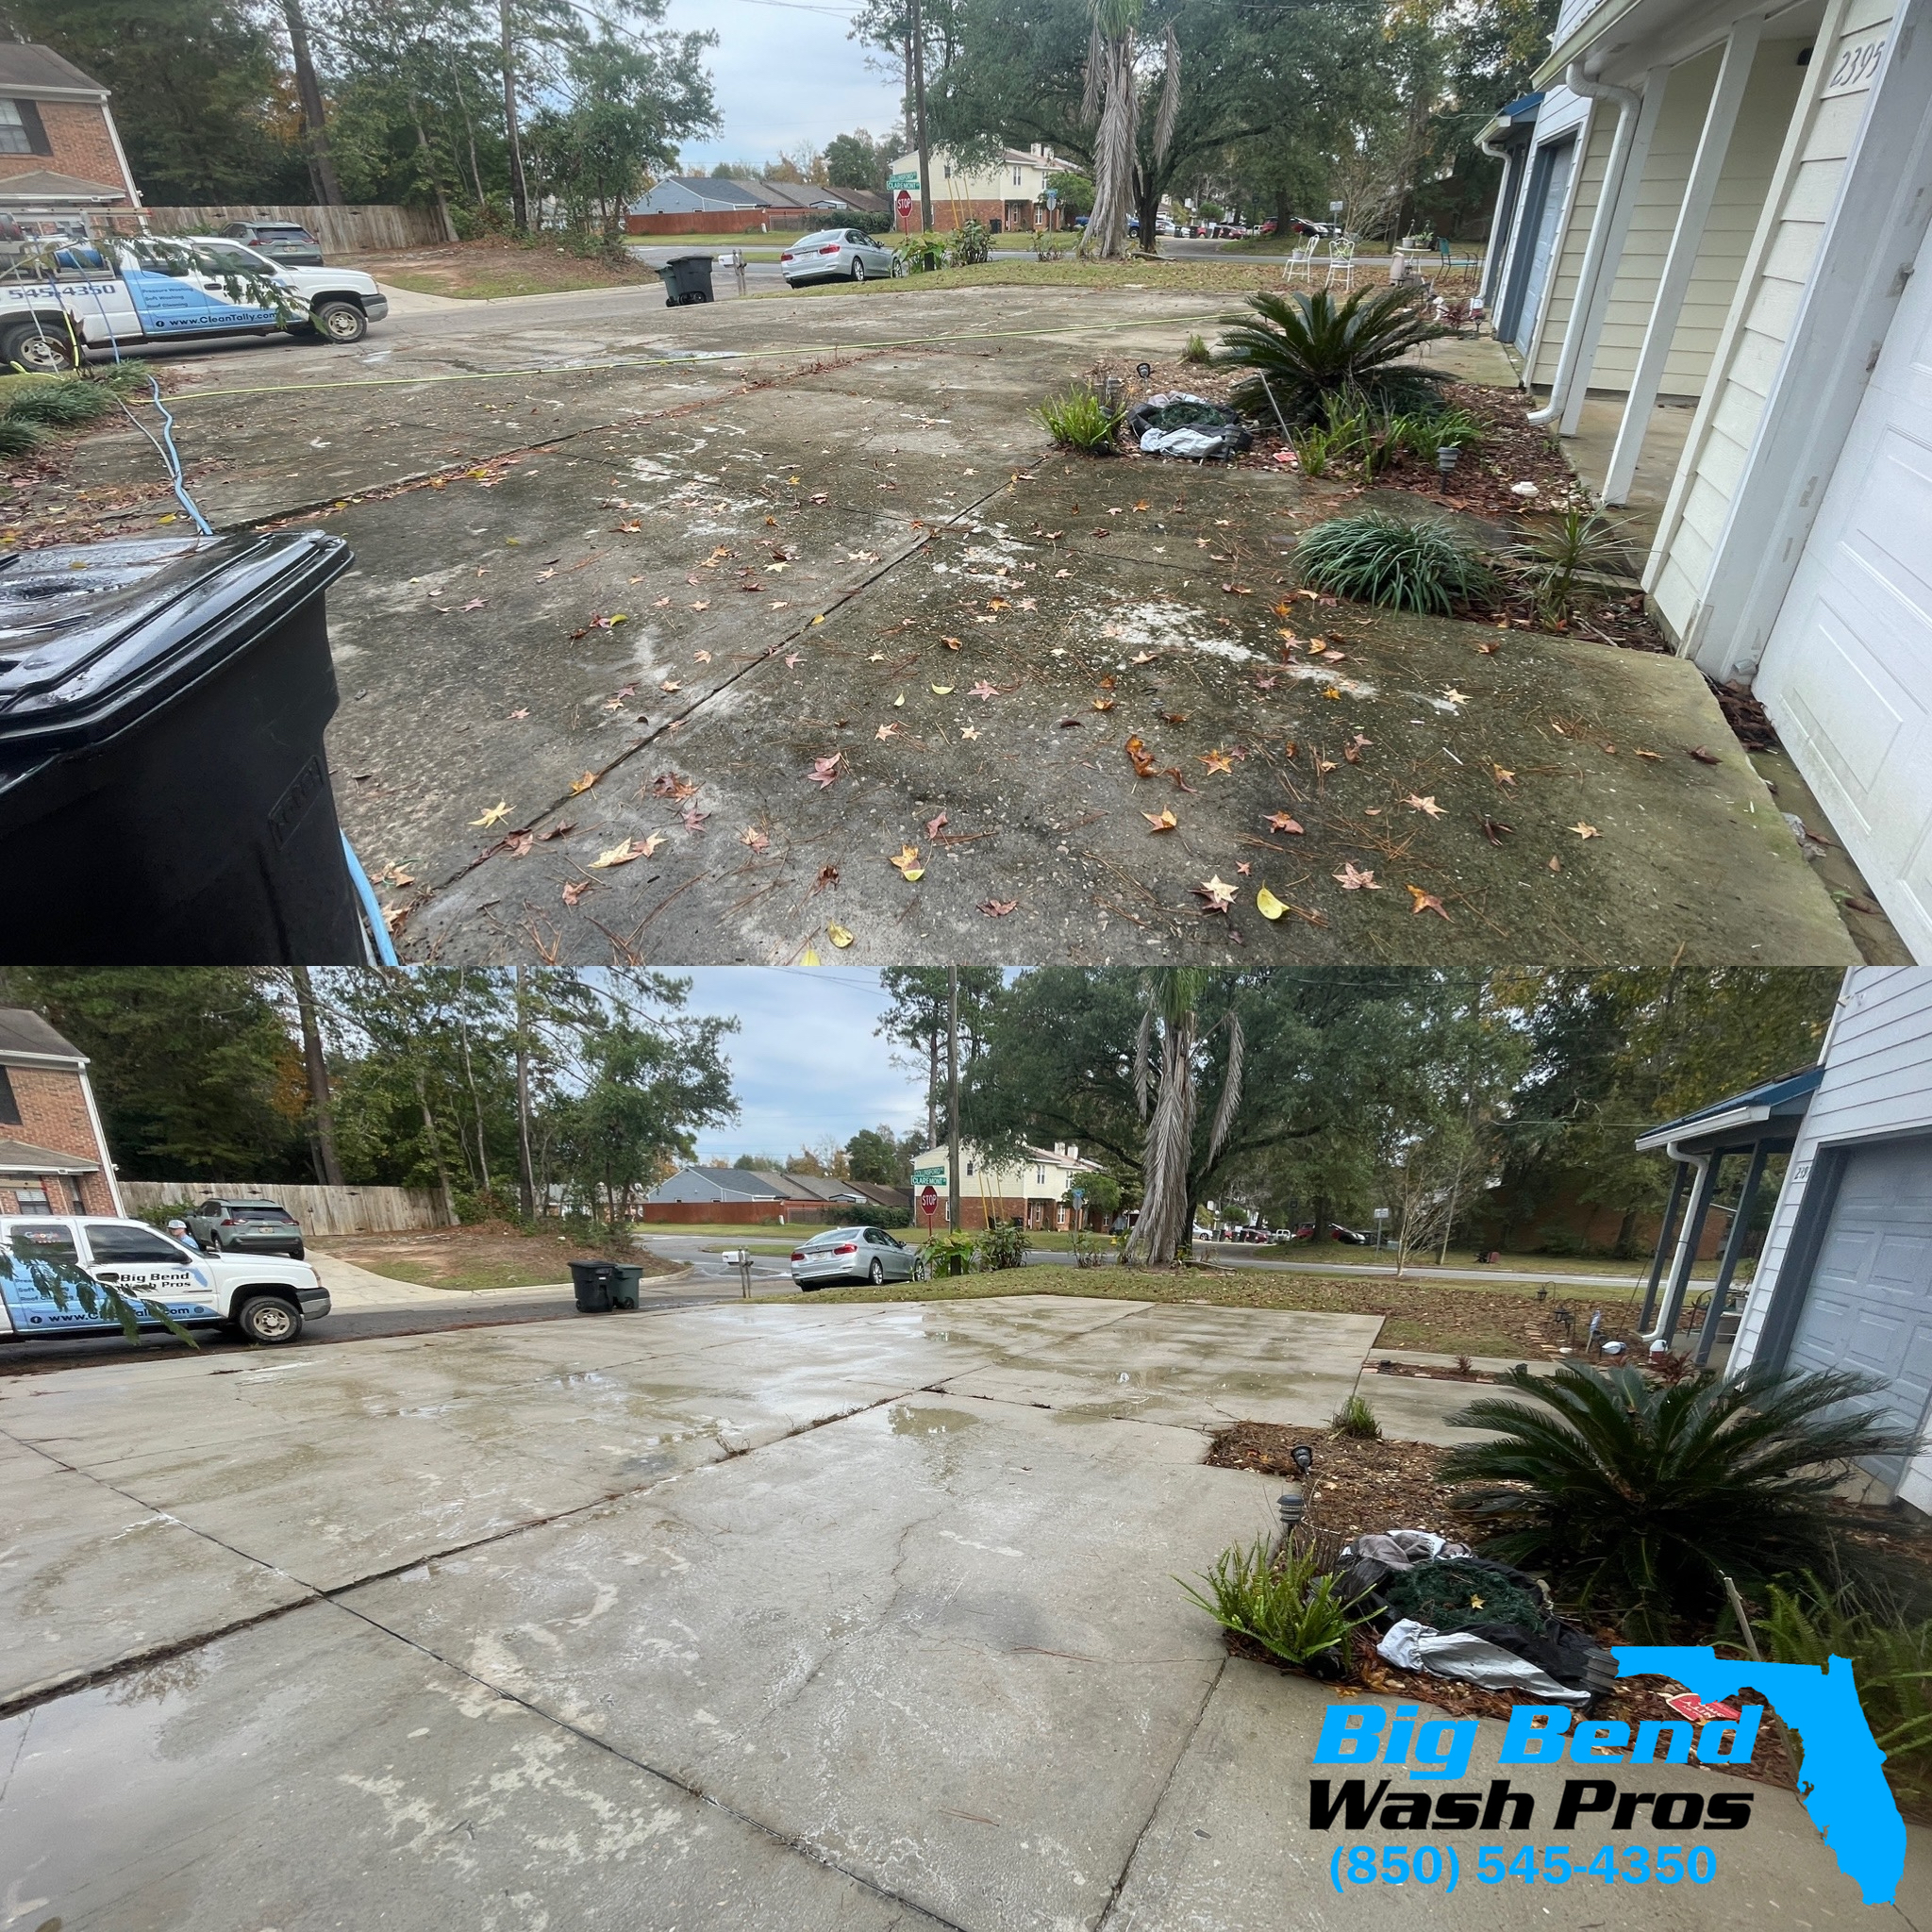 Top Quality Driveway and House Soft Washing Performed in Tallahassee, FL